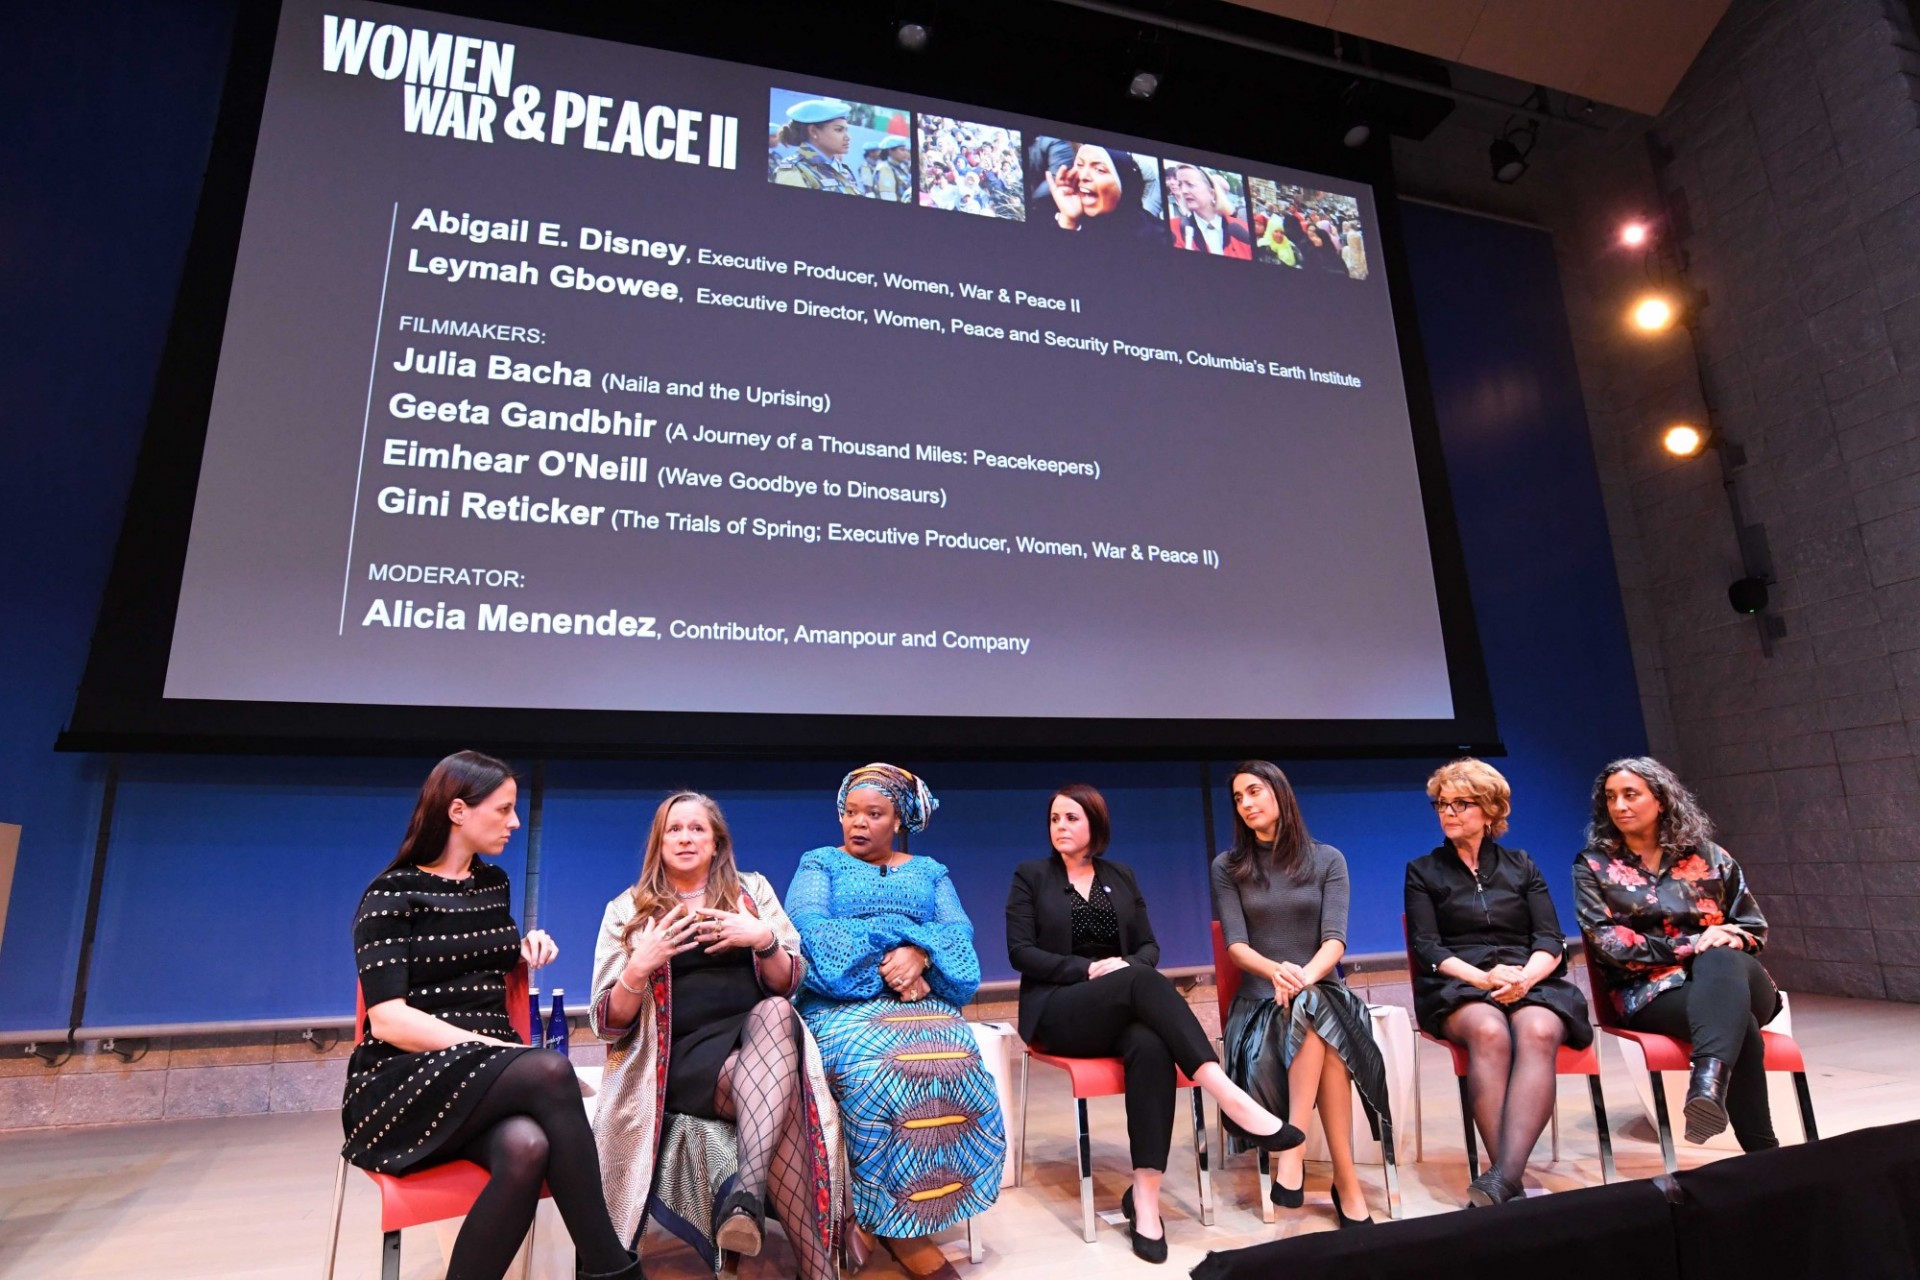 Speakers at the Public Event for the launch of "Women, War and Peace II" Series